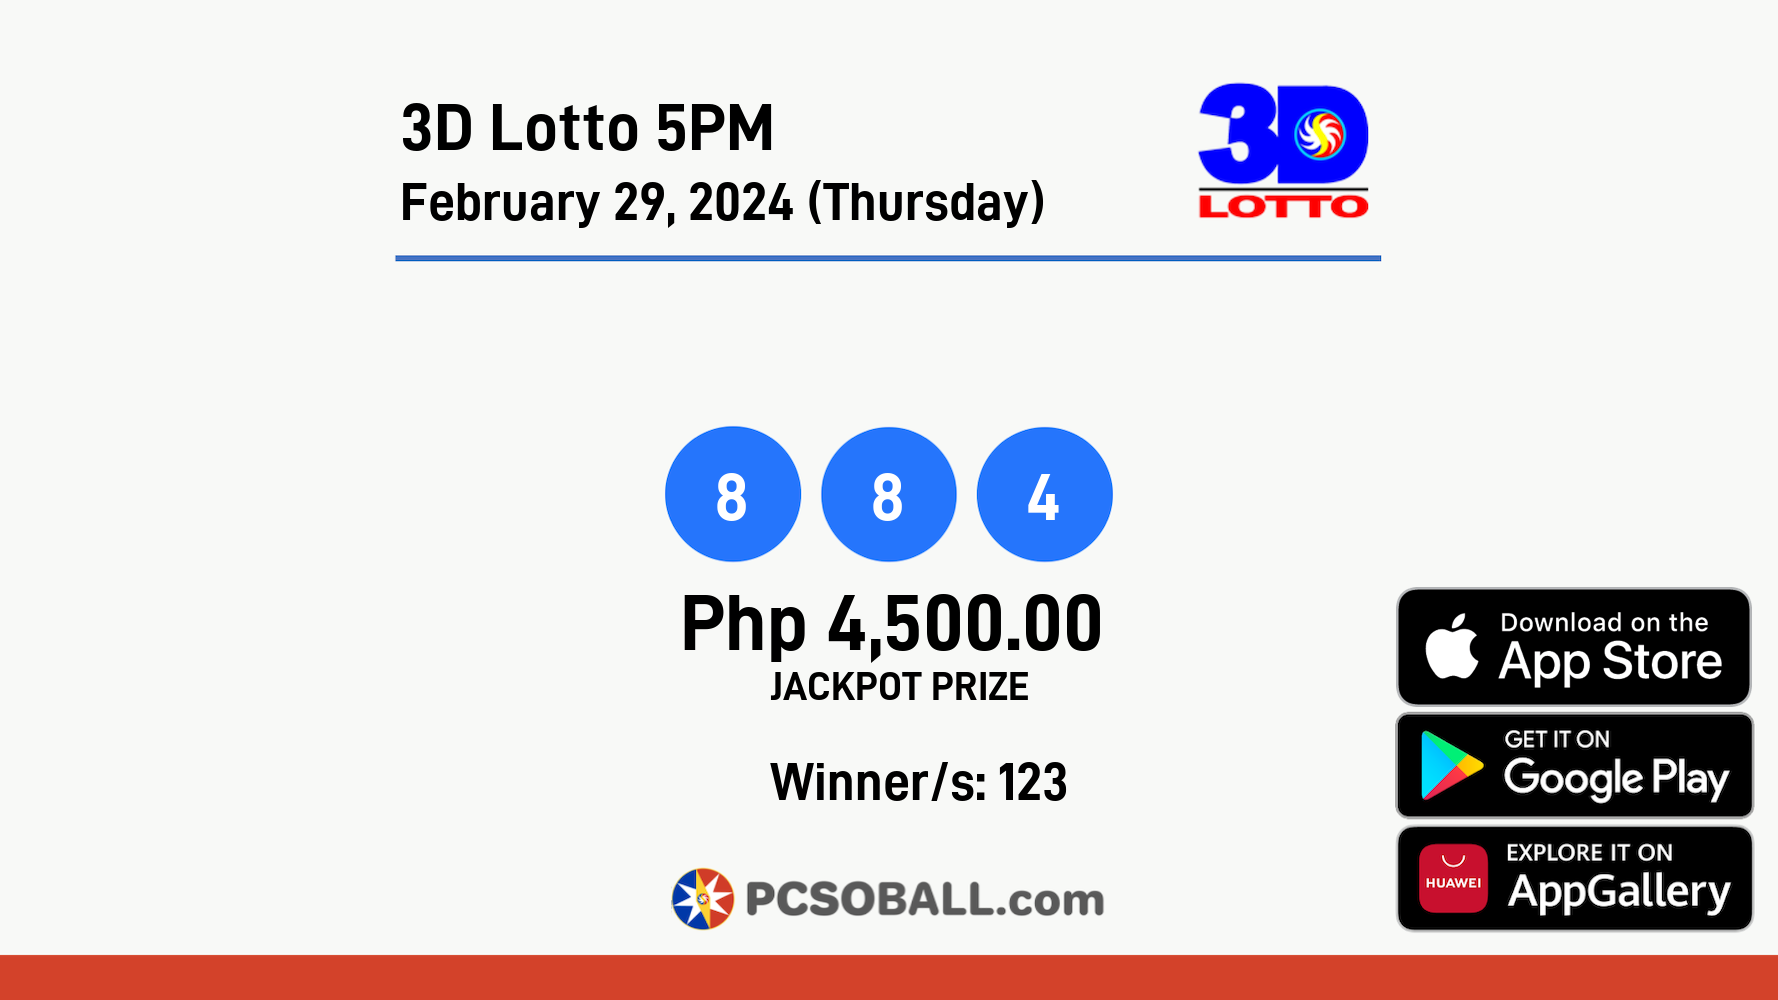 3D Lotto 5PM February 29, 2024 (Thursday) Result